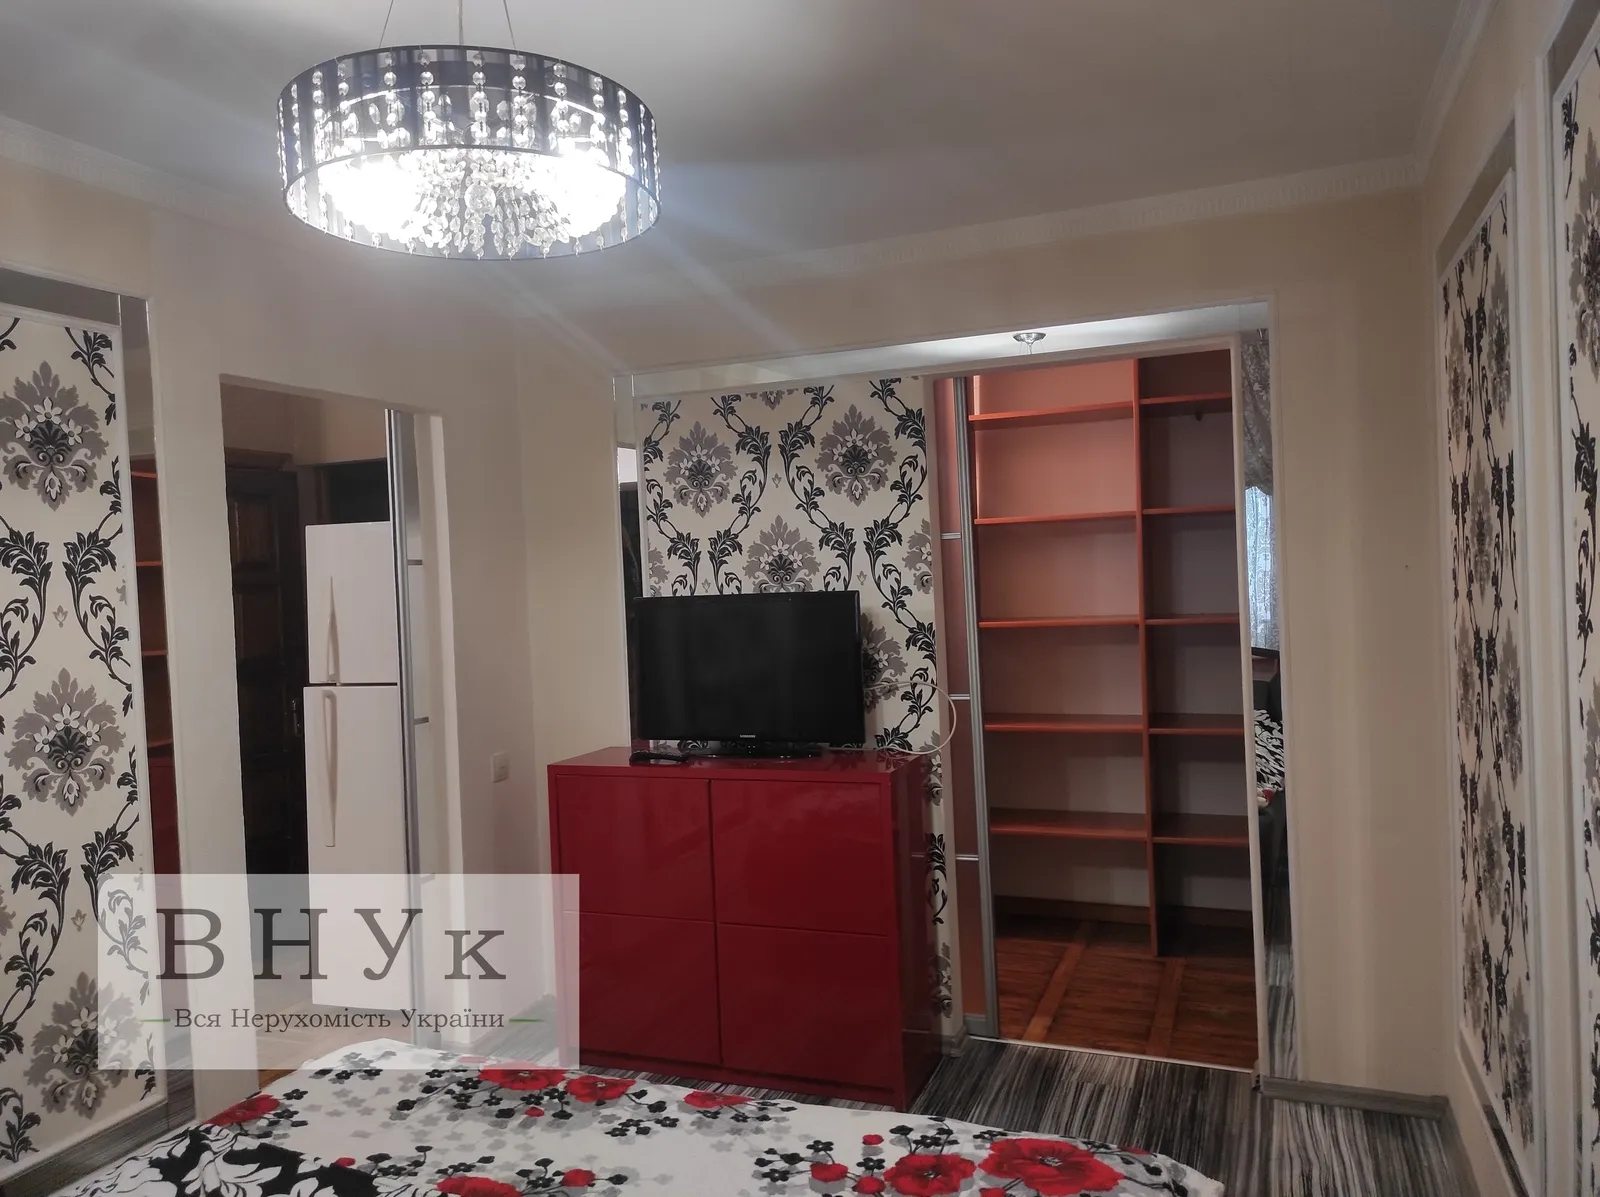 Apartments for sale. 3 rooms, 80 m², 1st floor/5 floors. Troleybusna vul., Ternopil. 